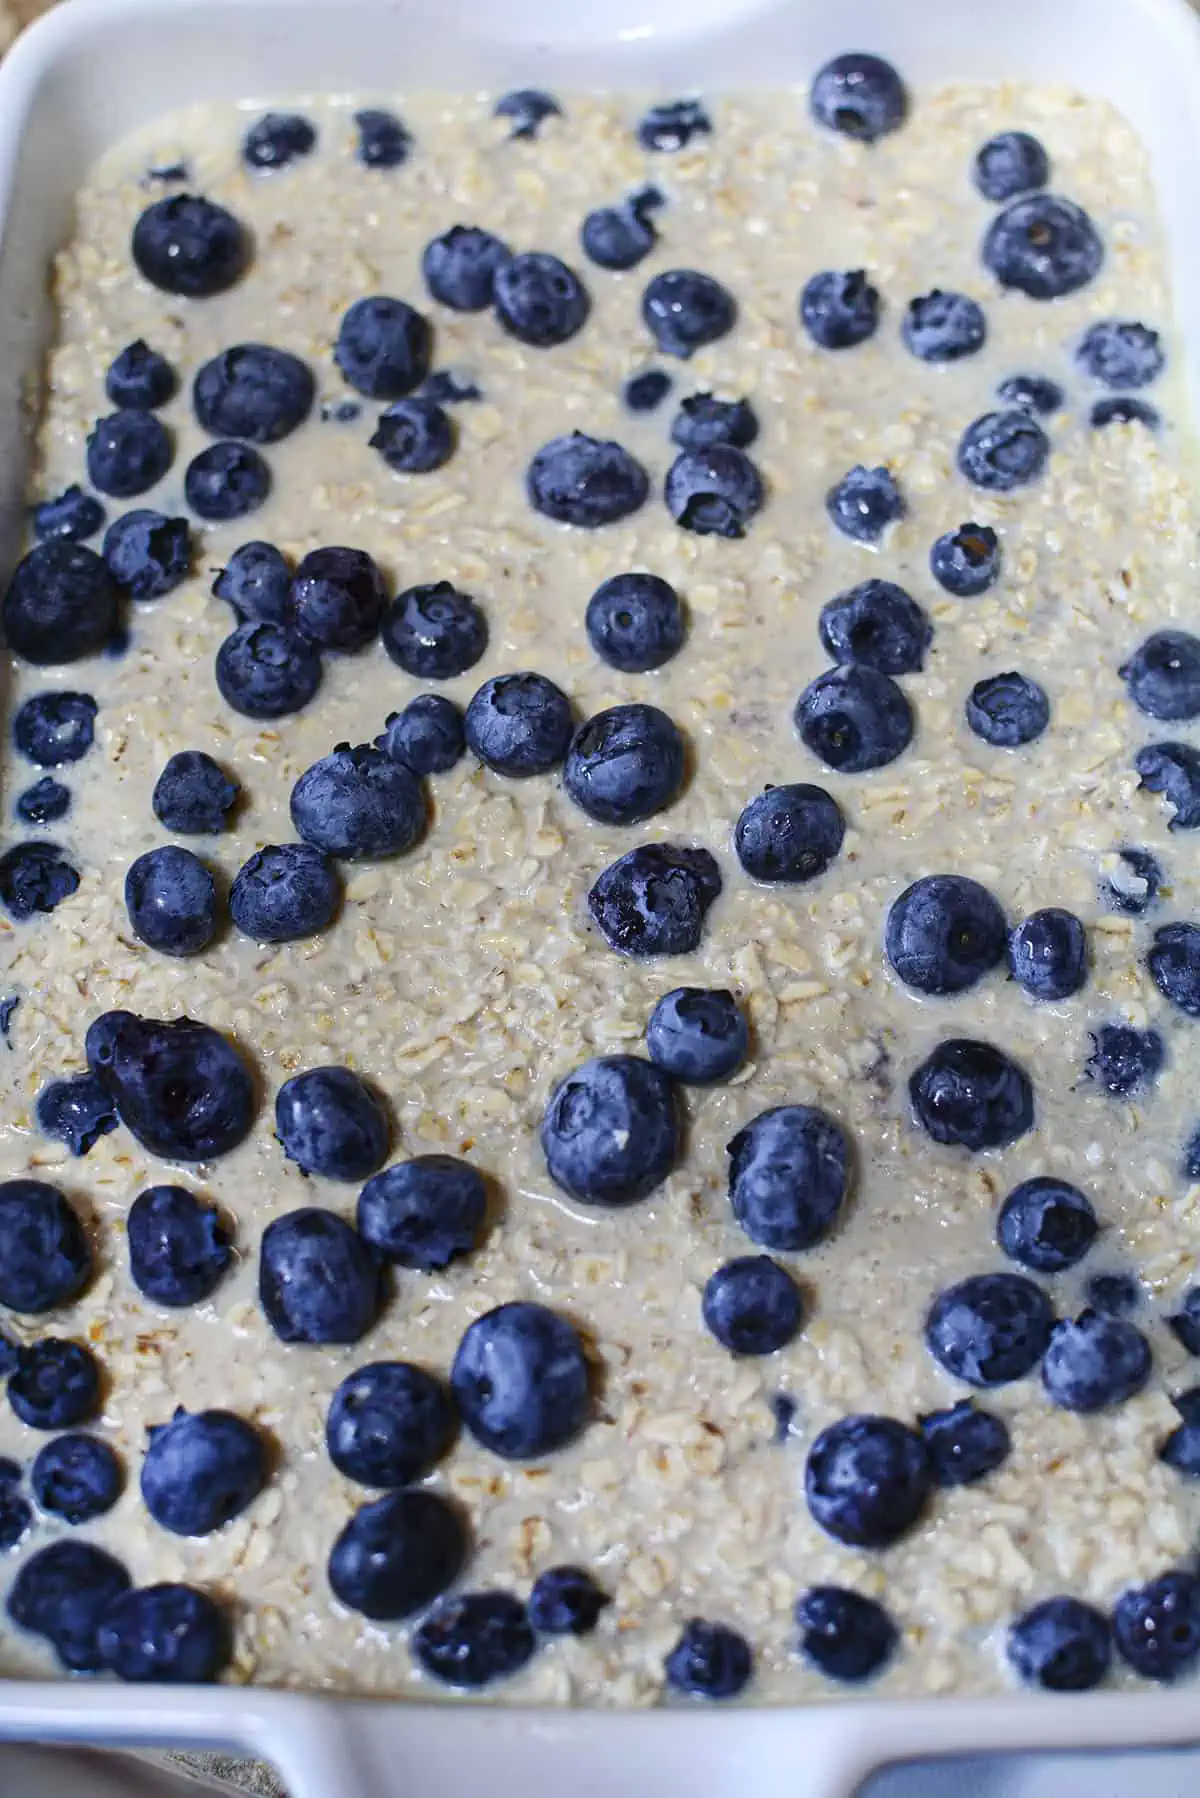 The remaining fresh blueberries sprinkled on top of the the oatmeal batter before baking.